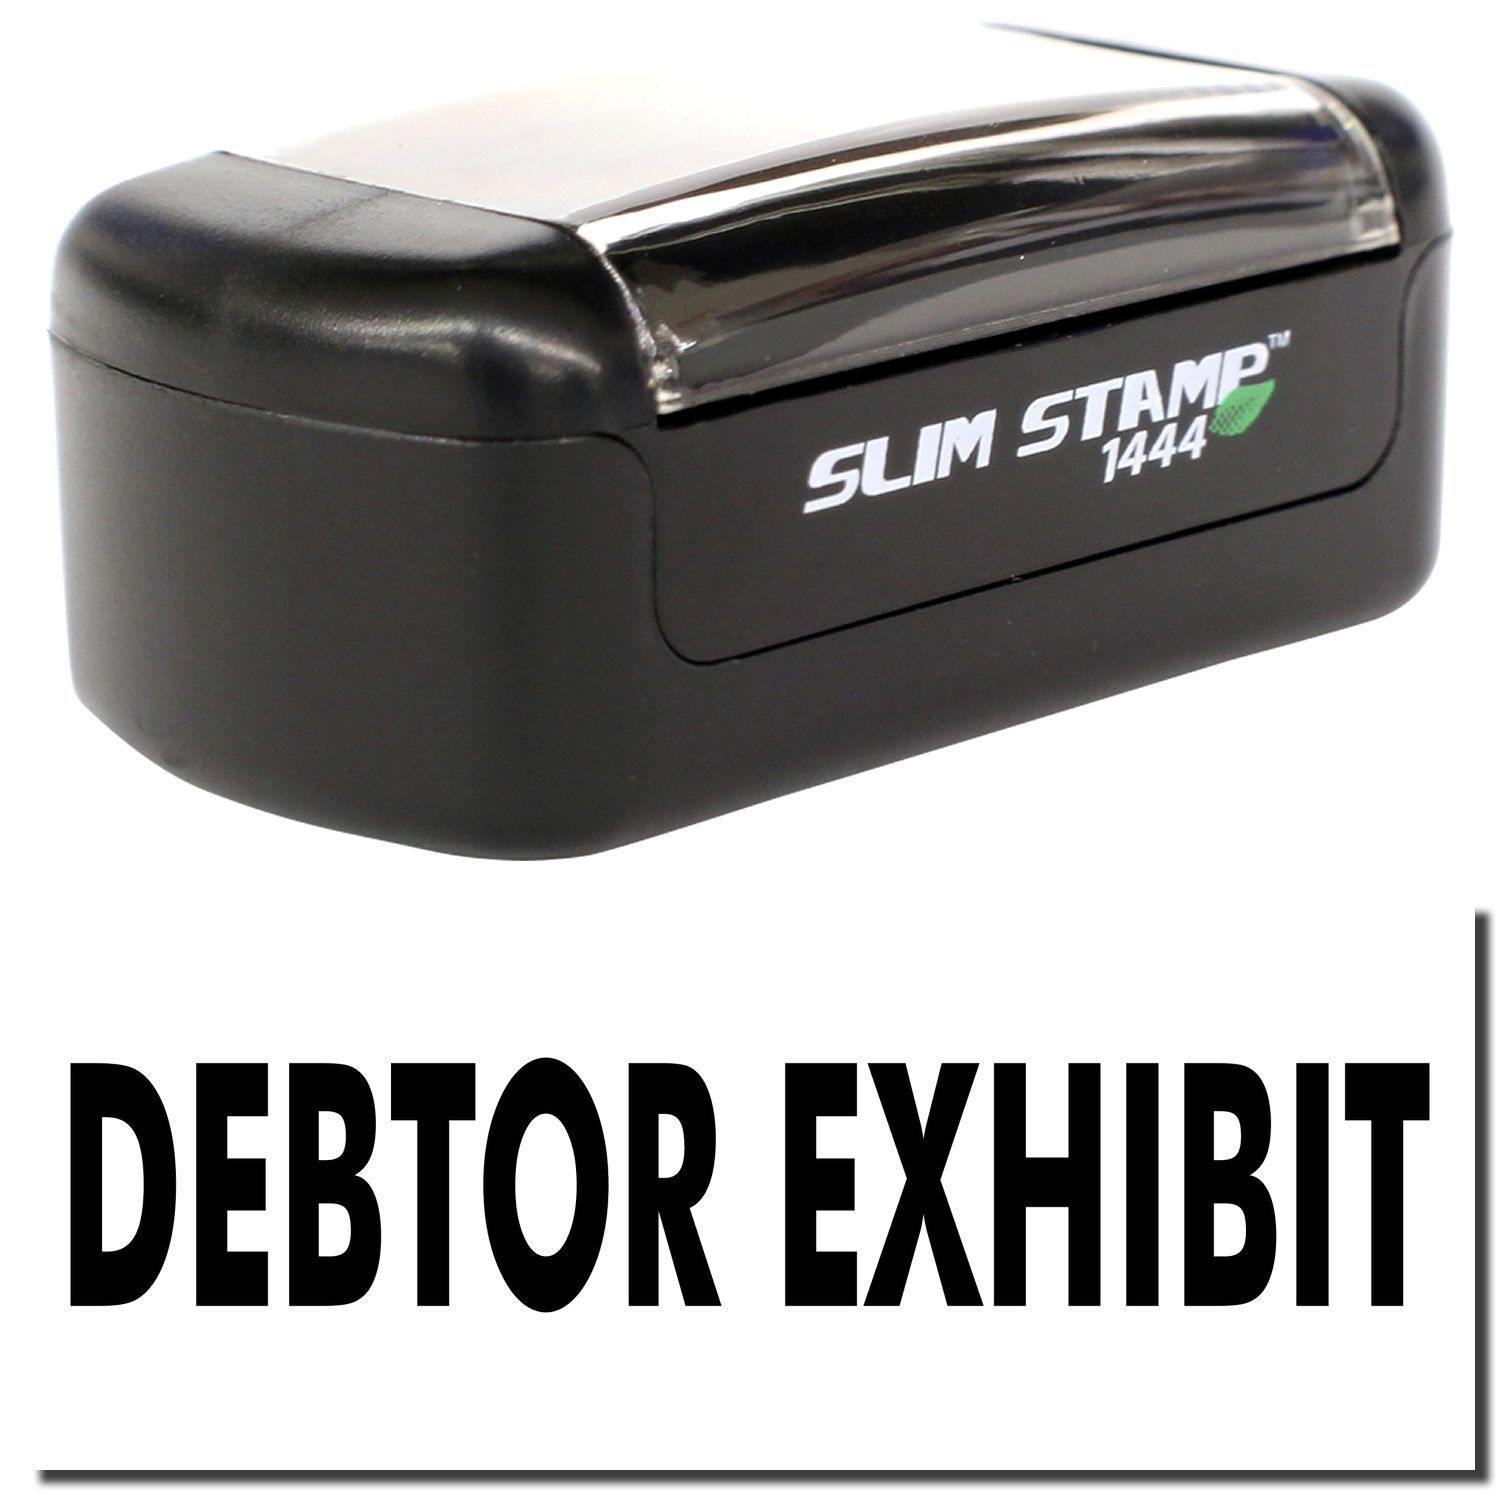 A stock office pre-inked stamp with a stamped image showing how the text "DEBTOR EXHIBIT" is displayed after stamping.